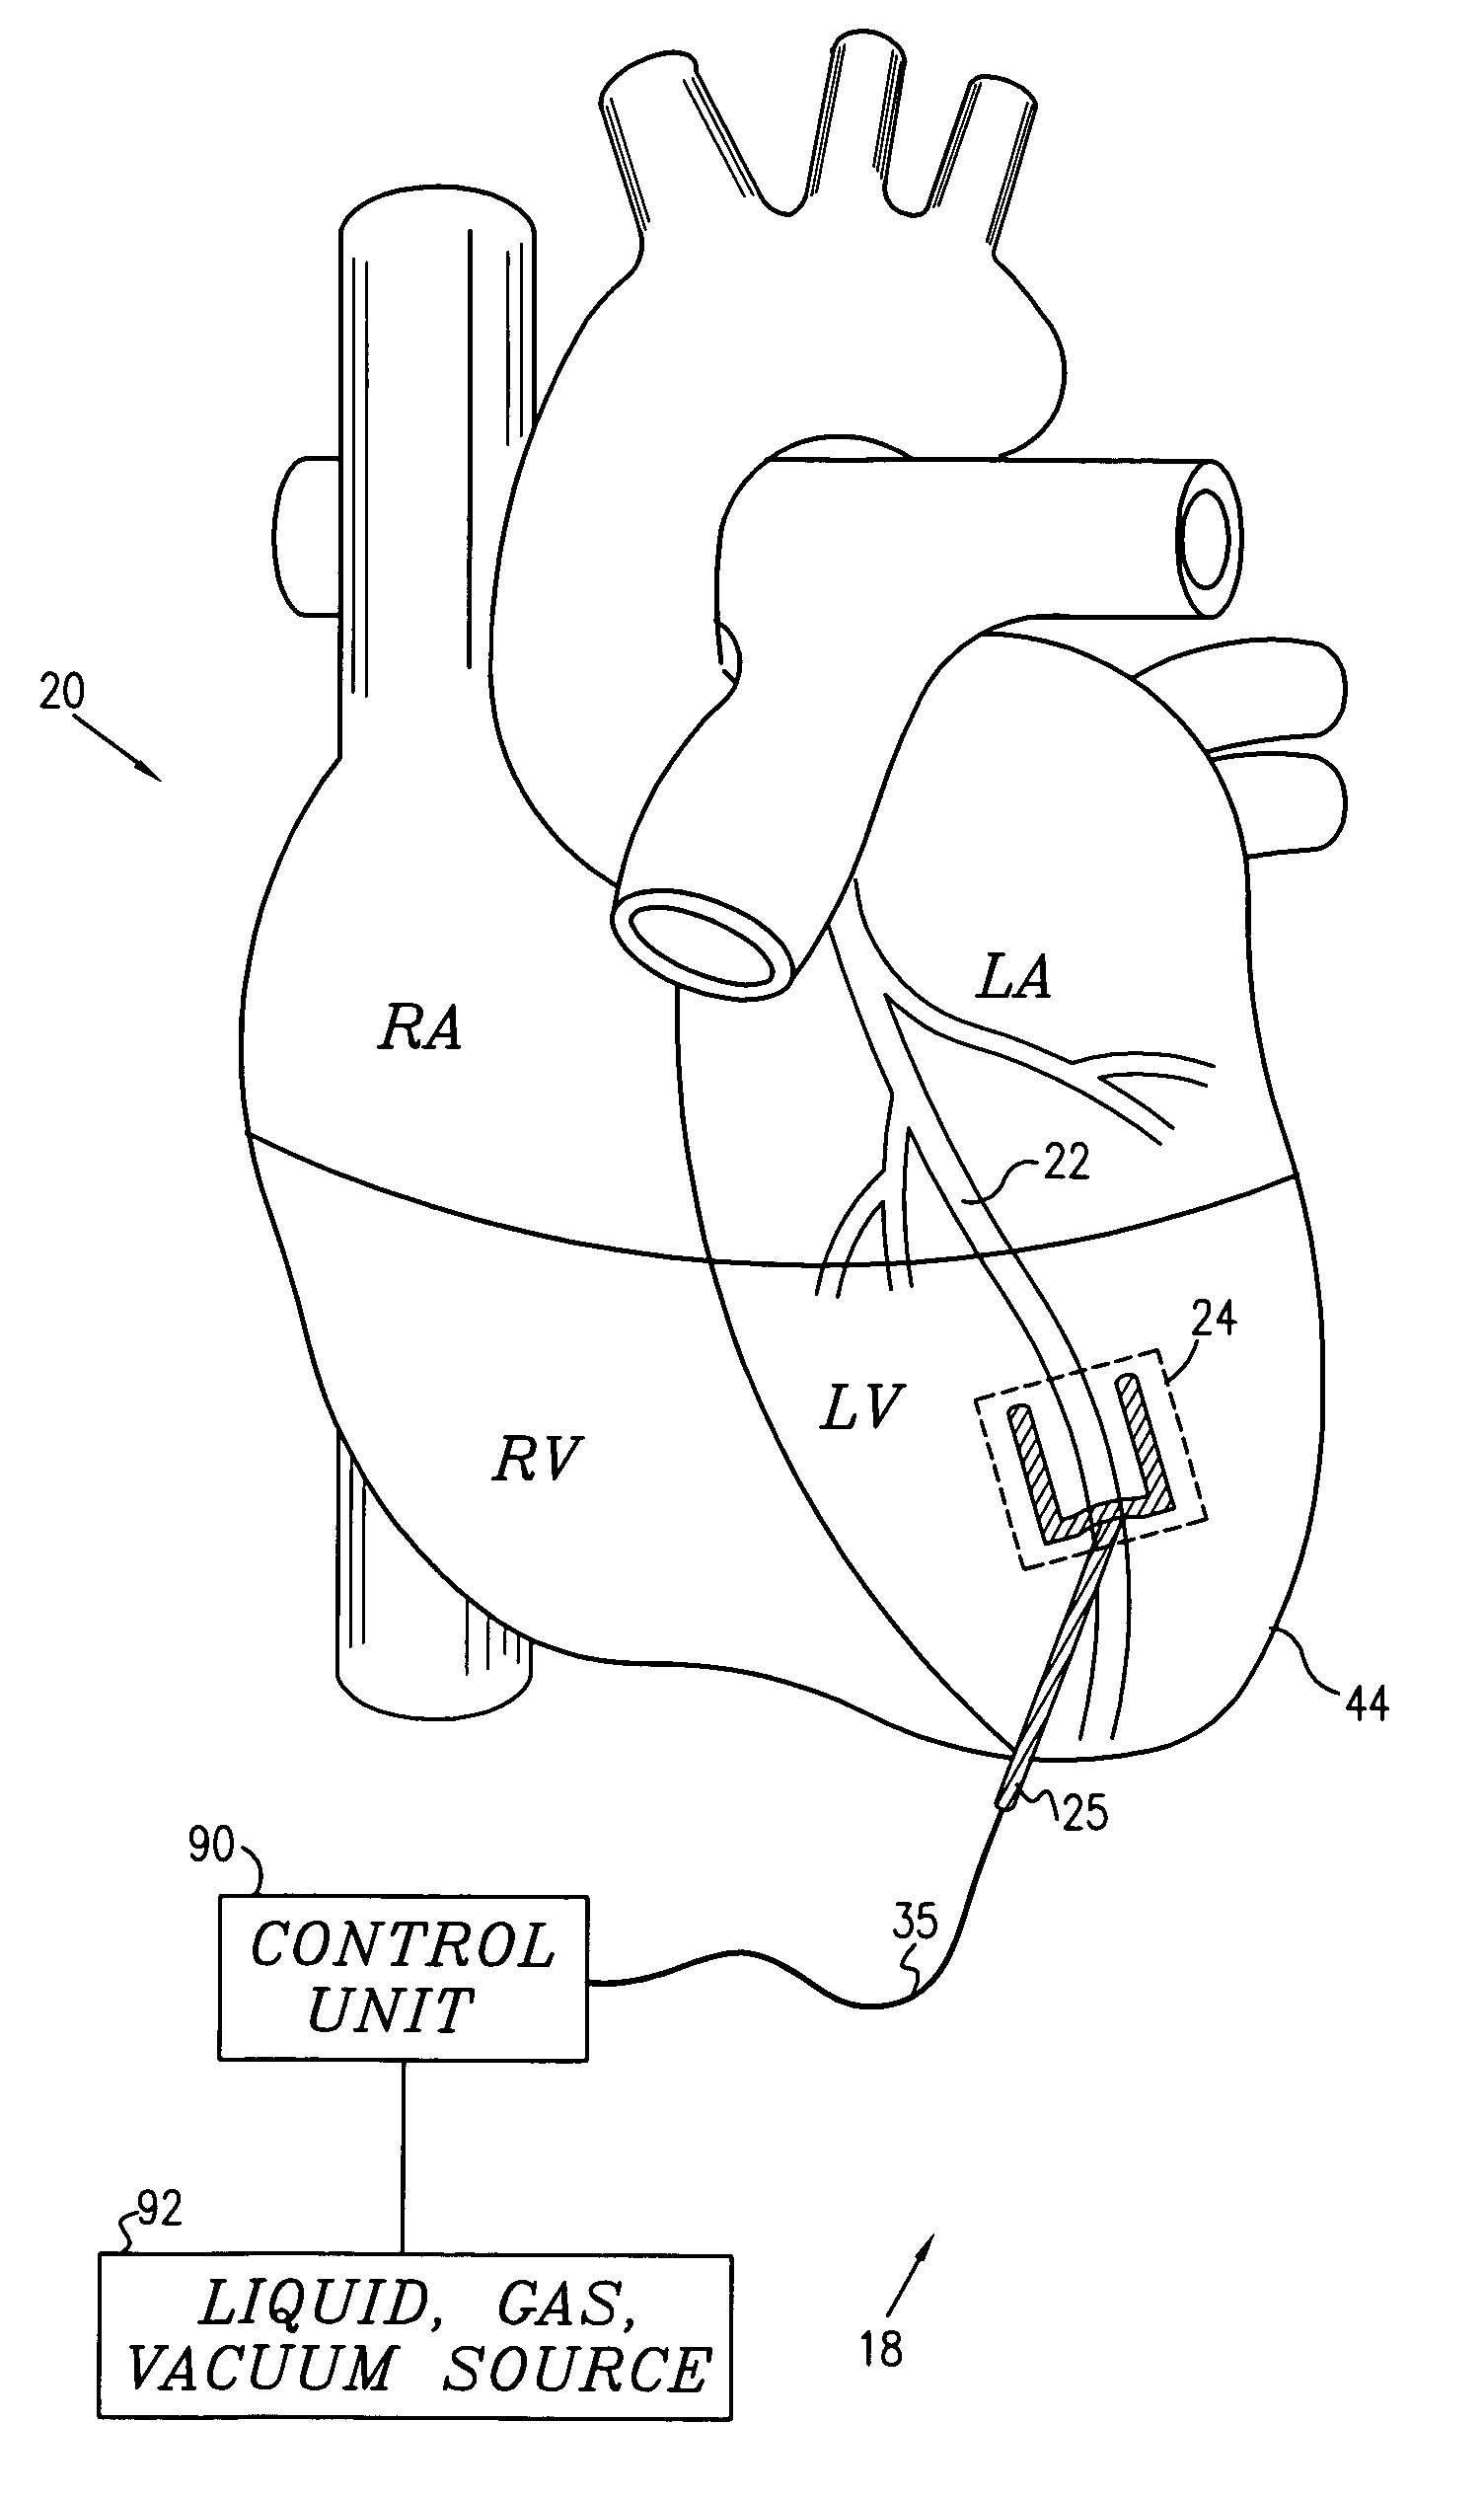 Local cardiac motion control using applied electrical signals and mechanical force